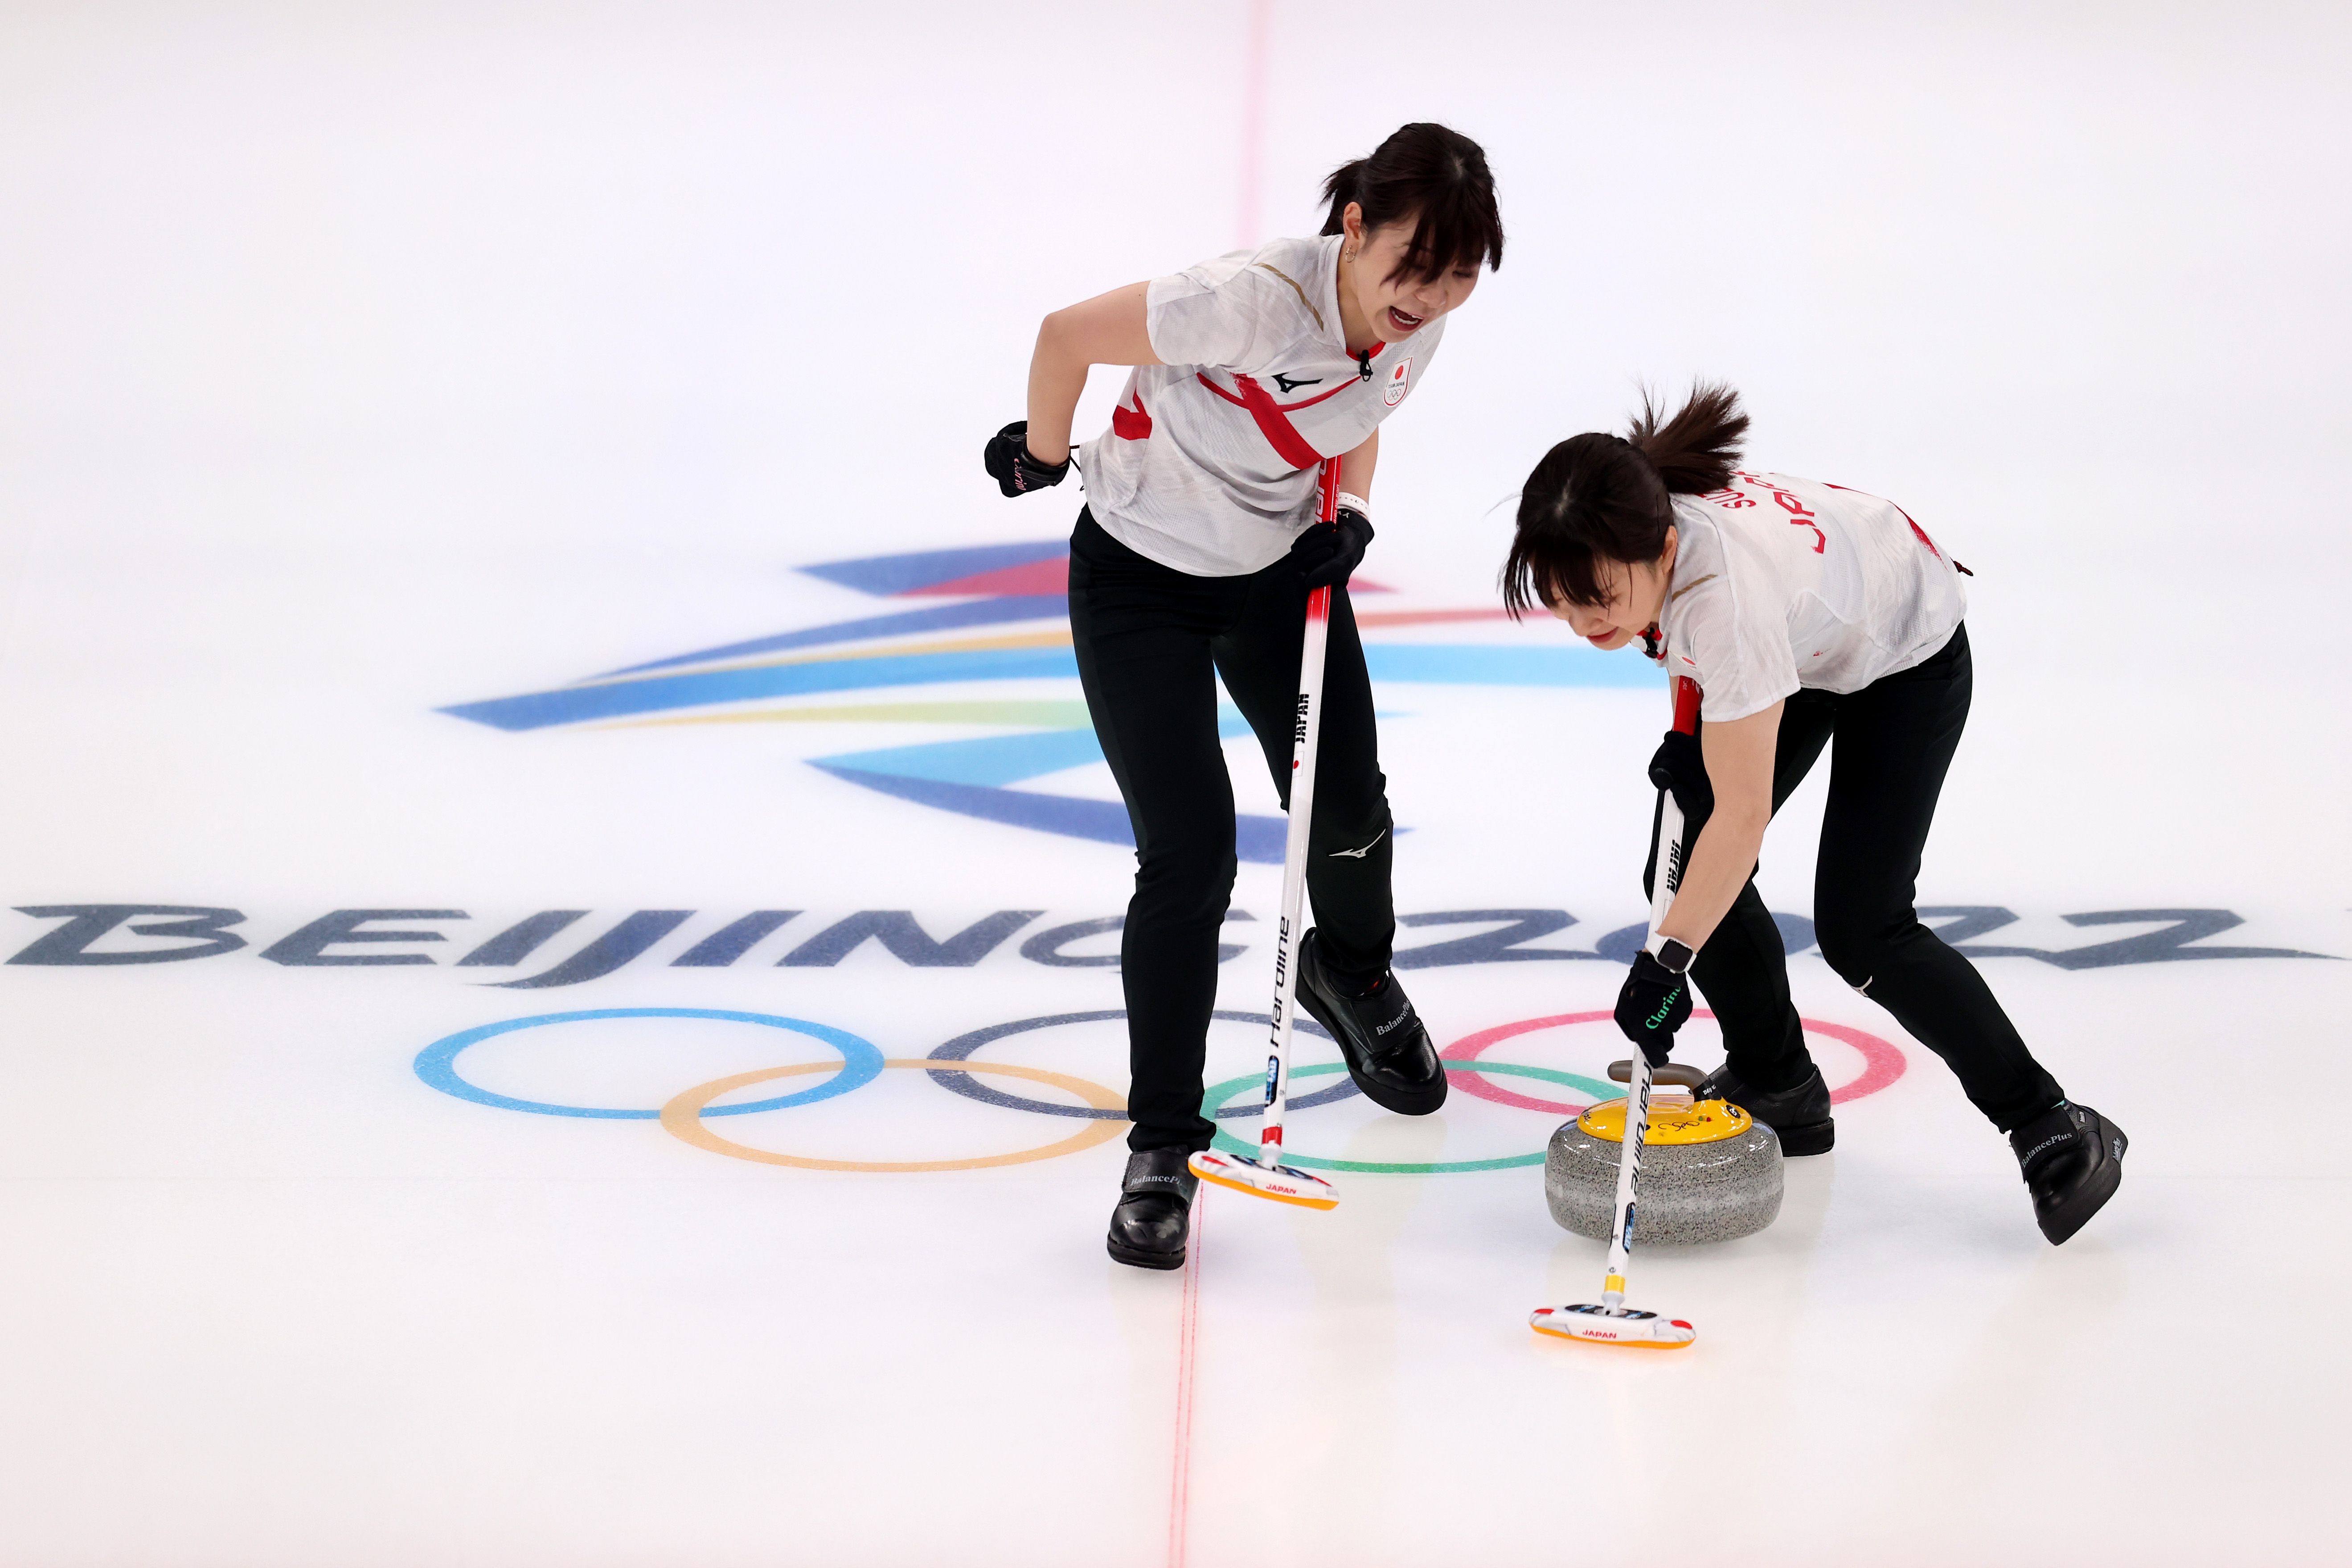  Chinami Yoshida (L) and Yumi Suzuki of Team Japan compete against Team Canada during the Women's Round Robin Curling Session in the Winter Olympic Games in Beijing, China, Feb. 11